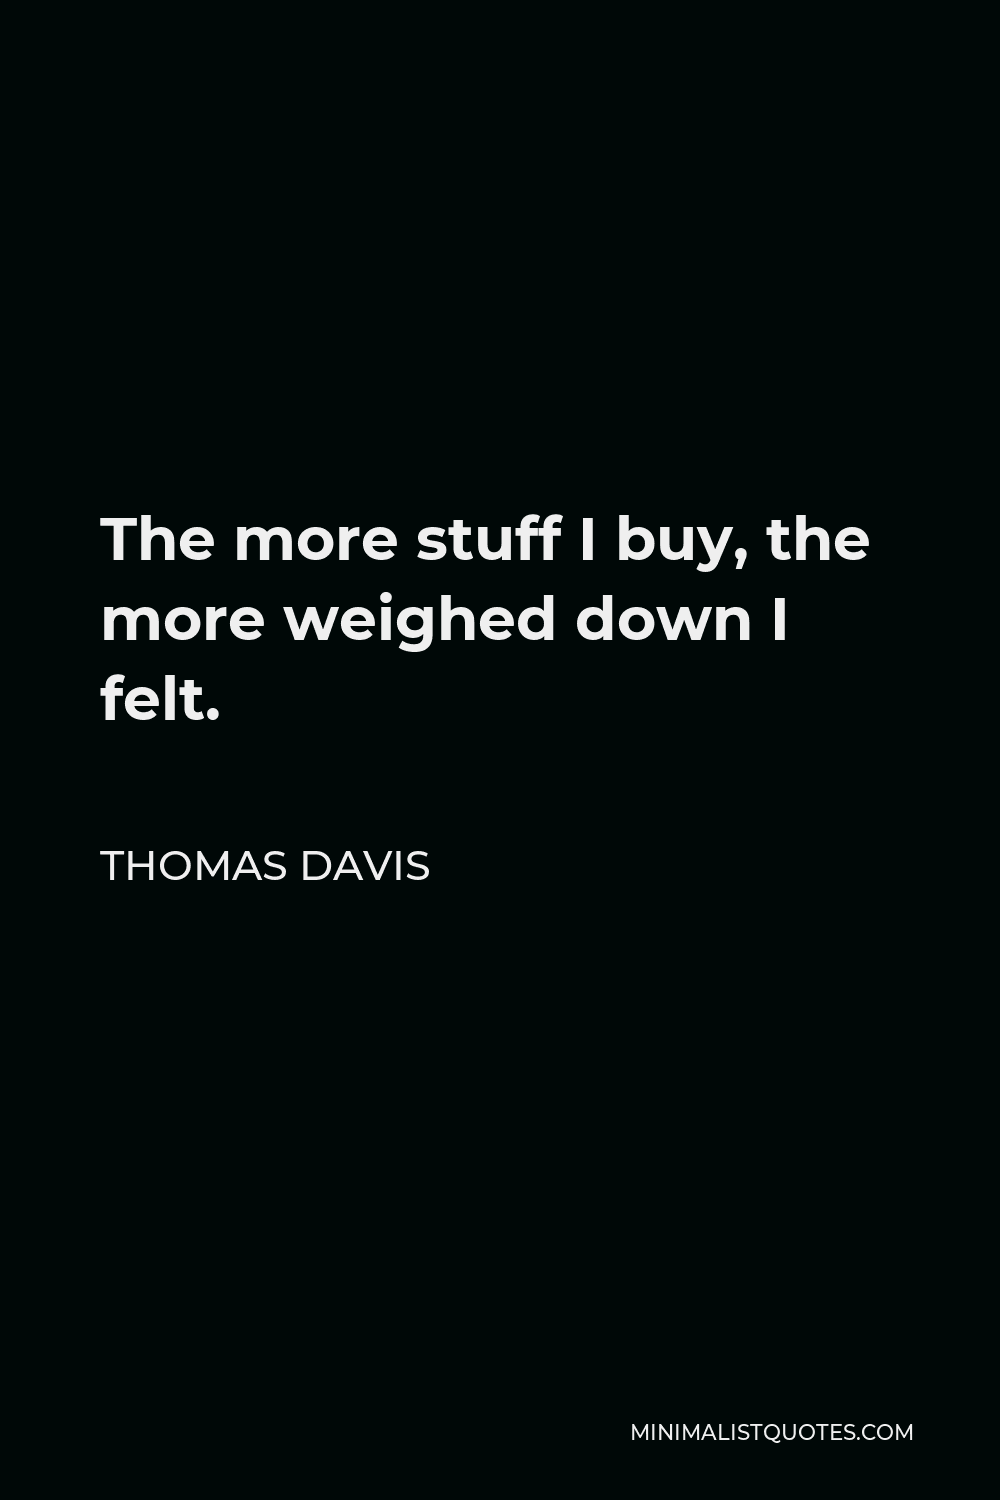 Thomas Davis Quote - The more stuff I buy, the more weighed down I felt.